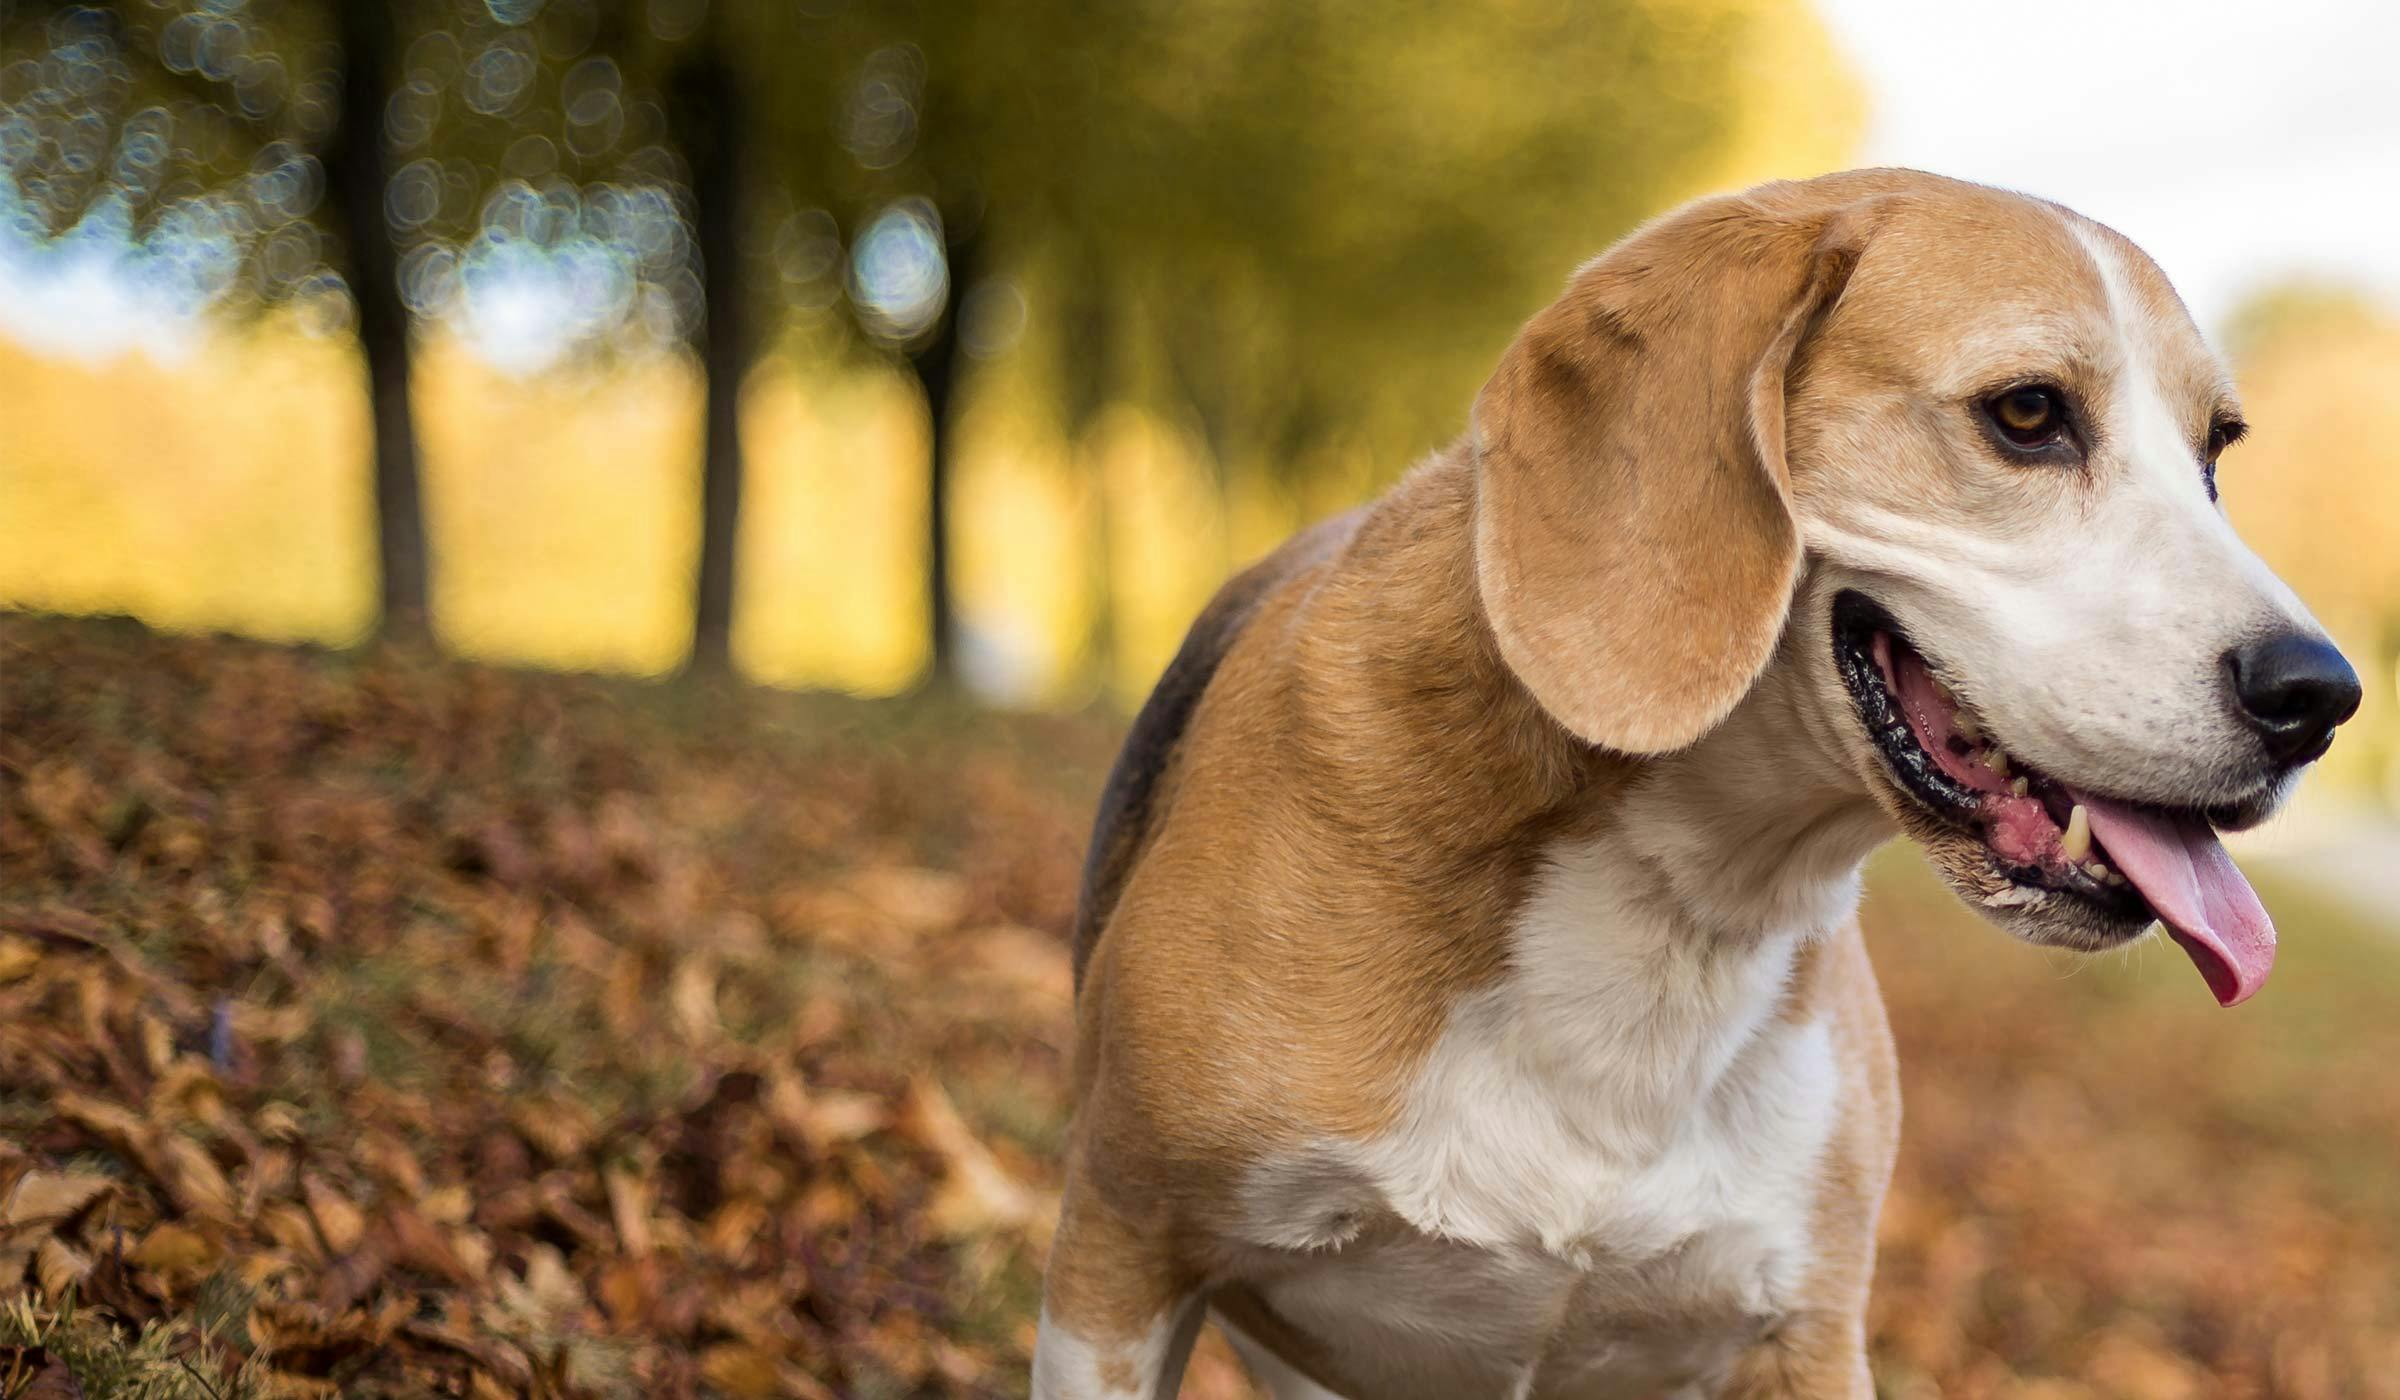 can a beagle be trained to walk off leash? 2